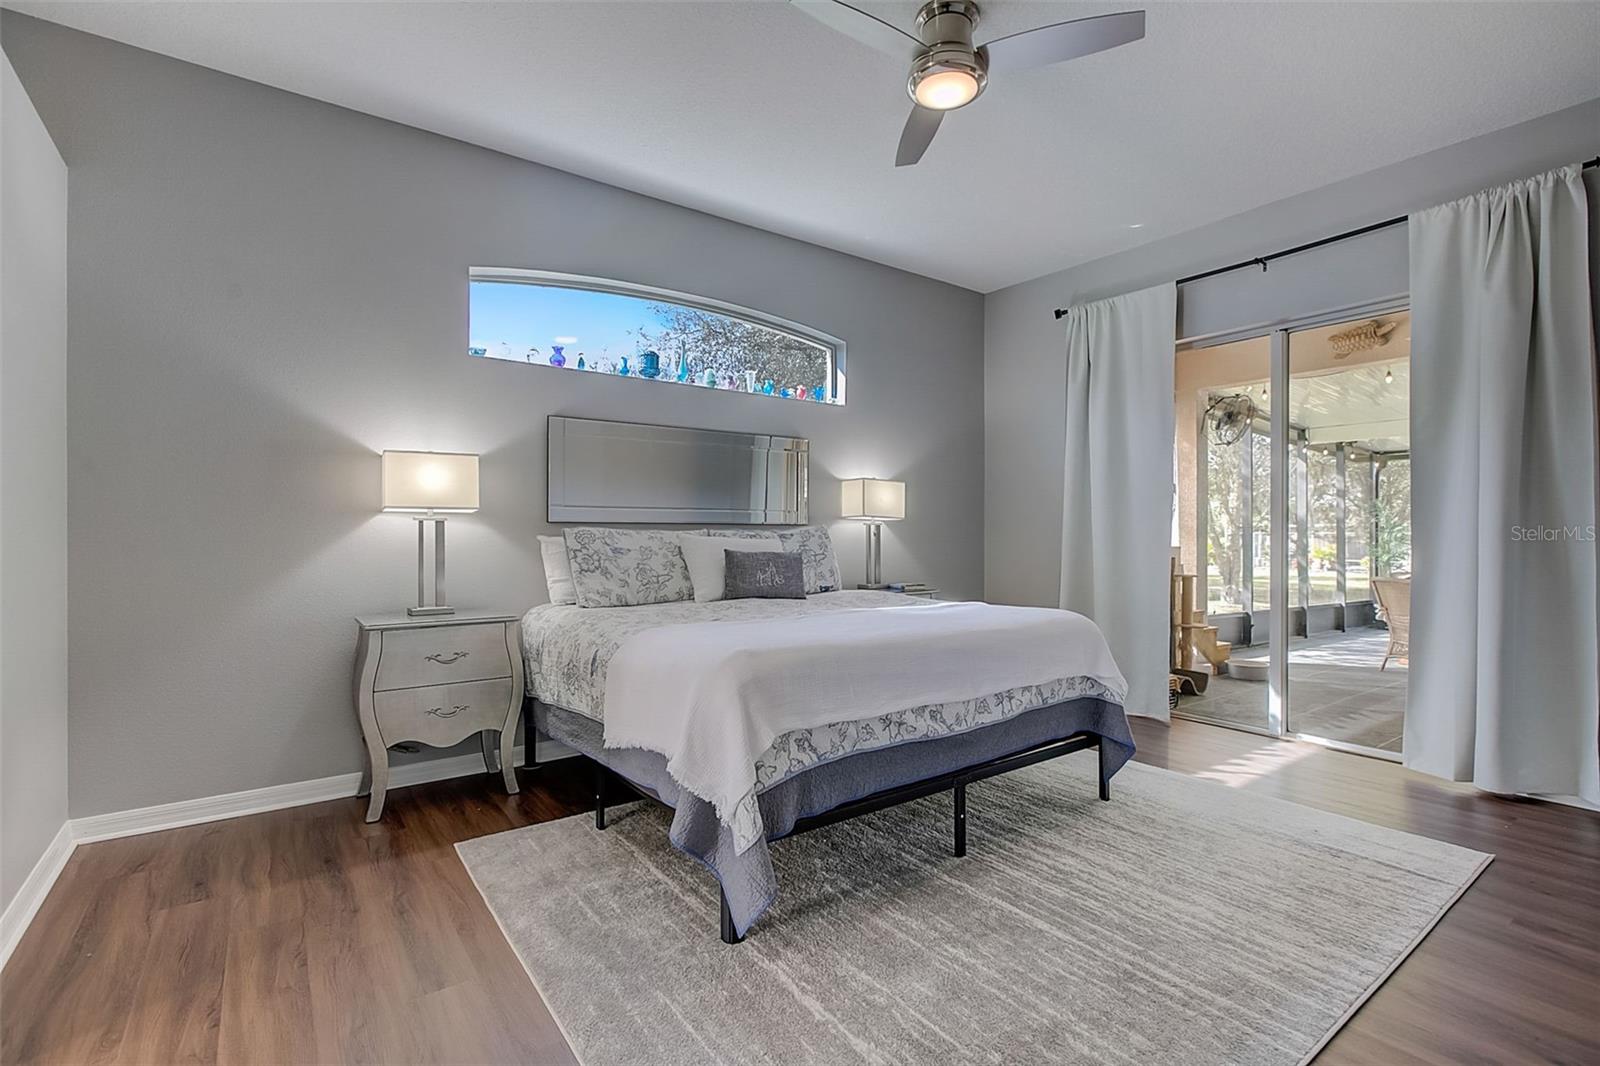 Spacious Master Bedroom with pocketing sliders out to lanai area